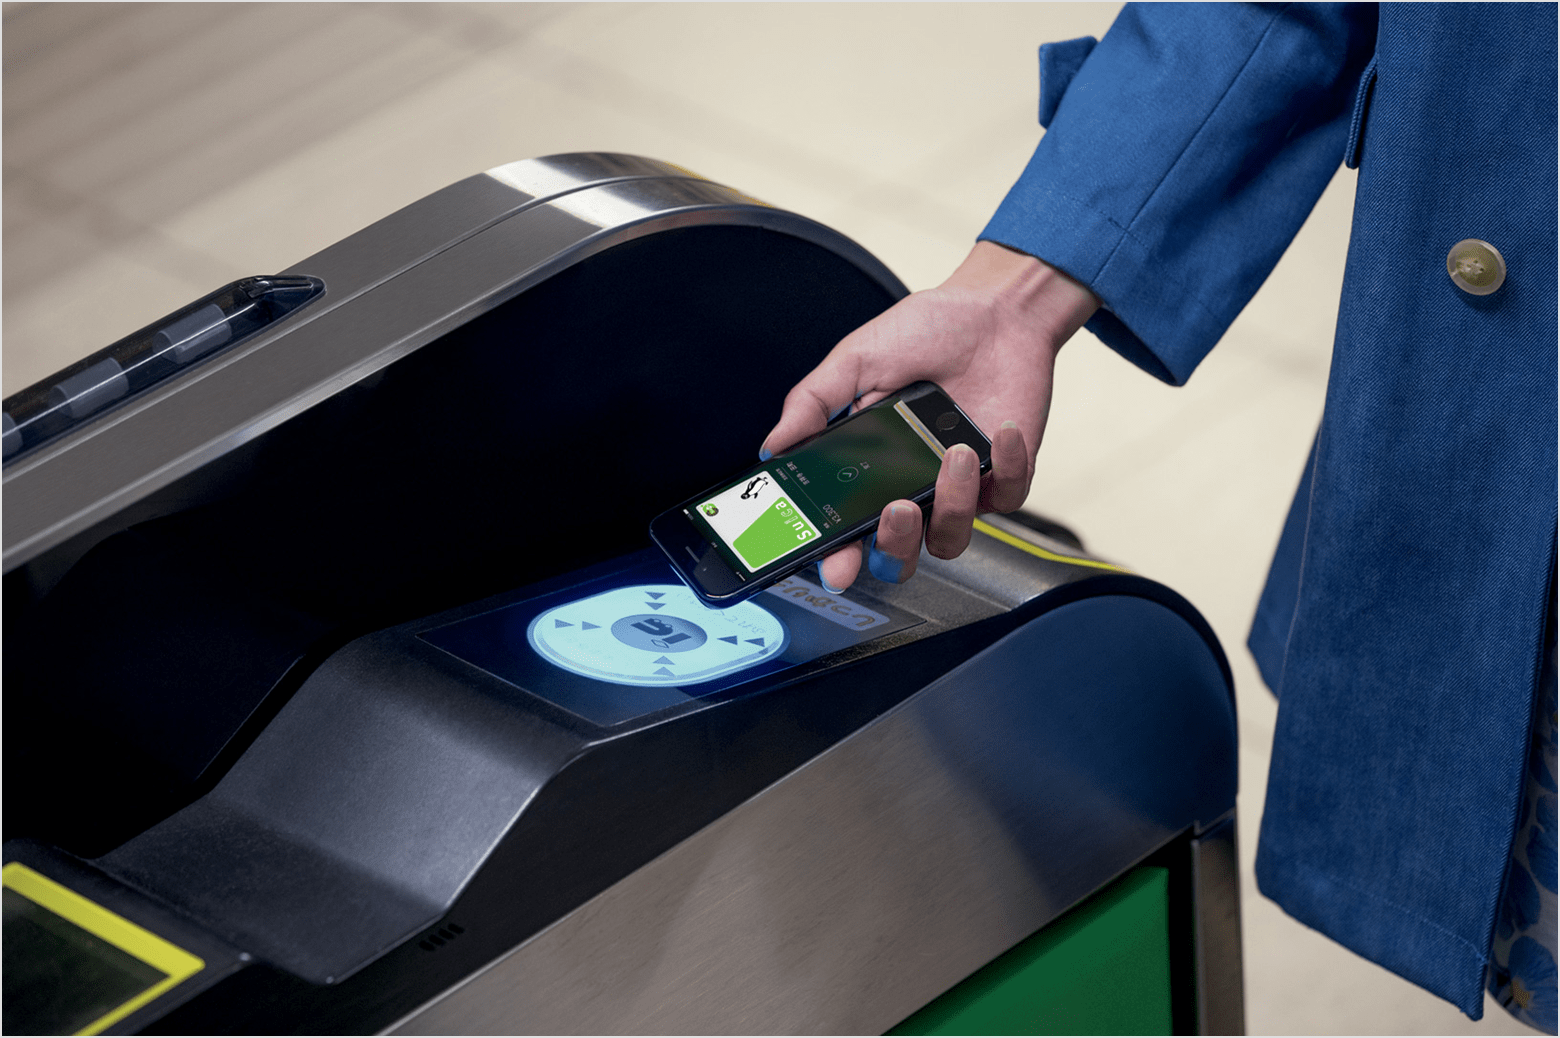 MetrôRio now accepts Apple Pay at all stations